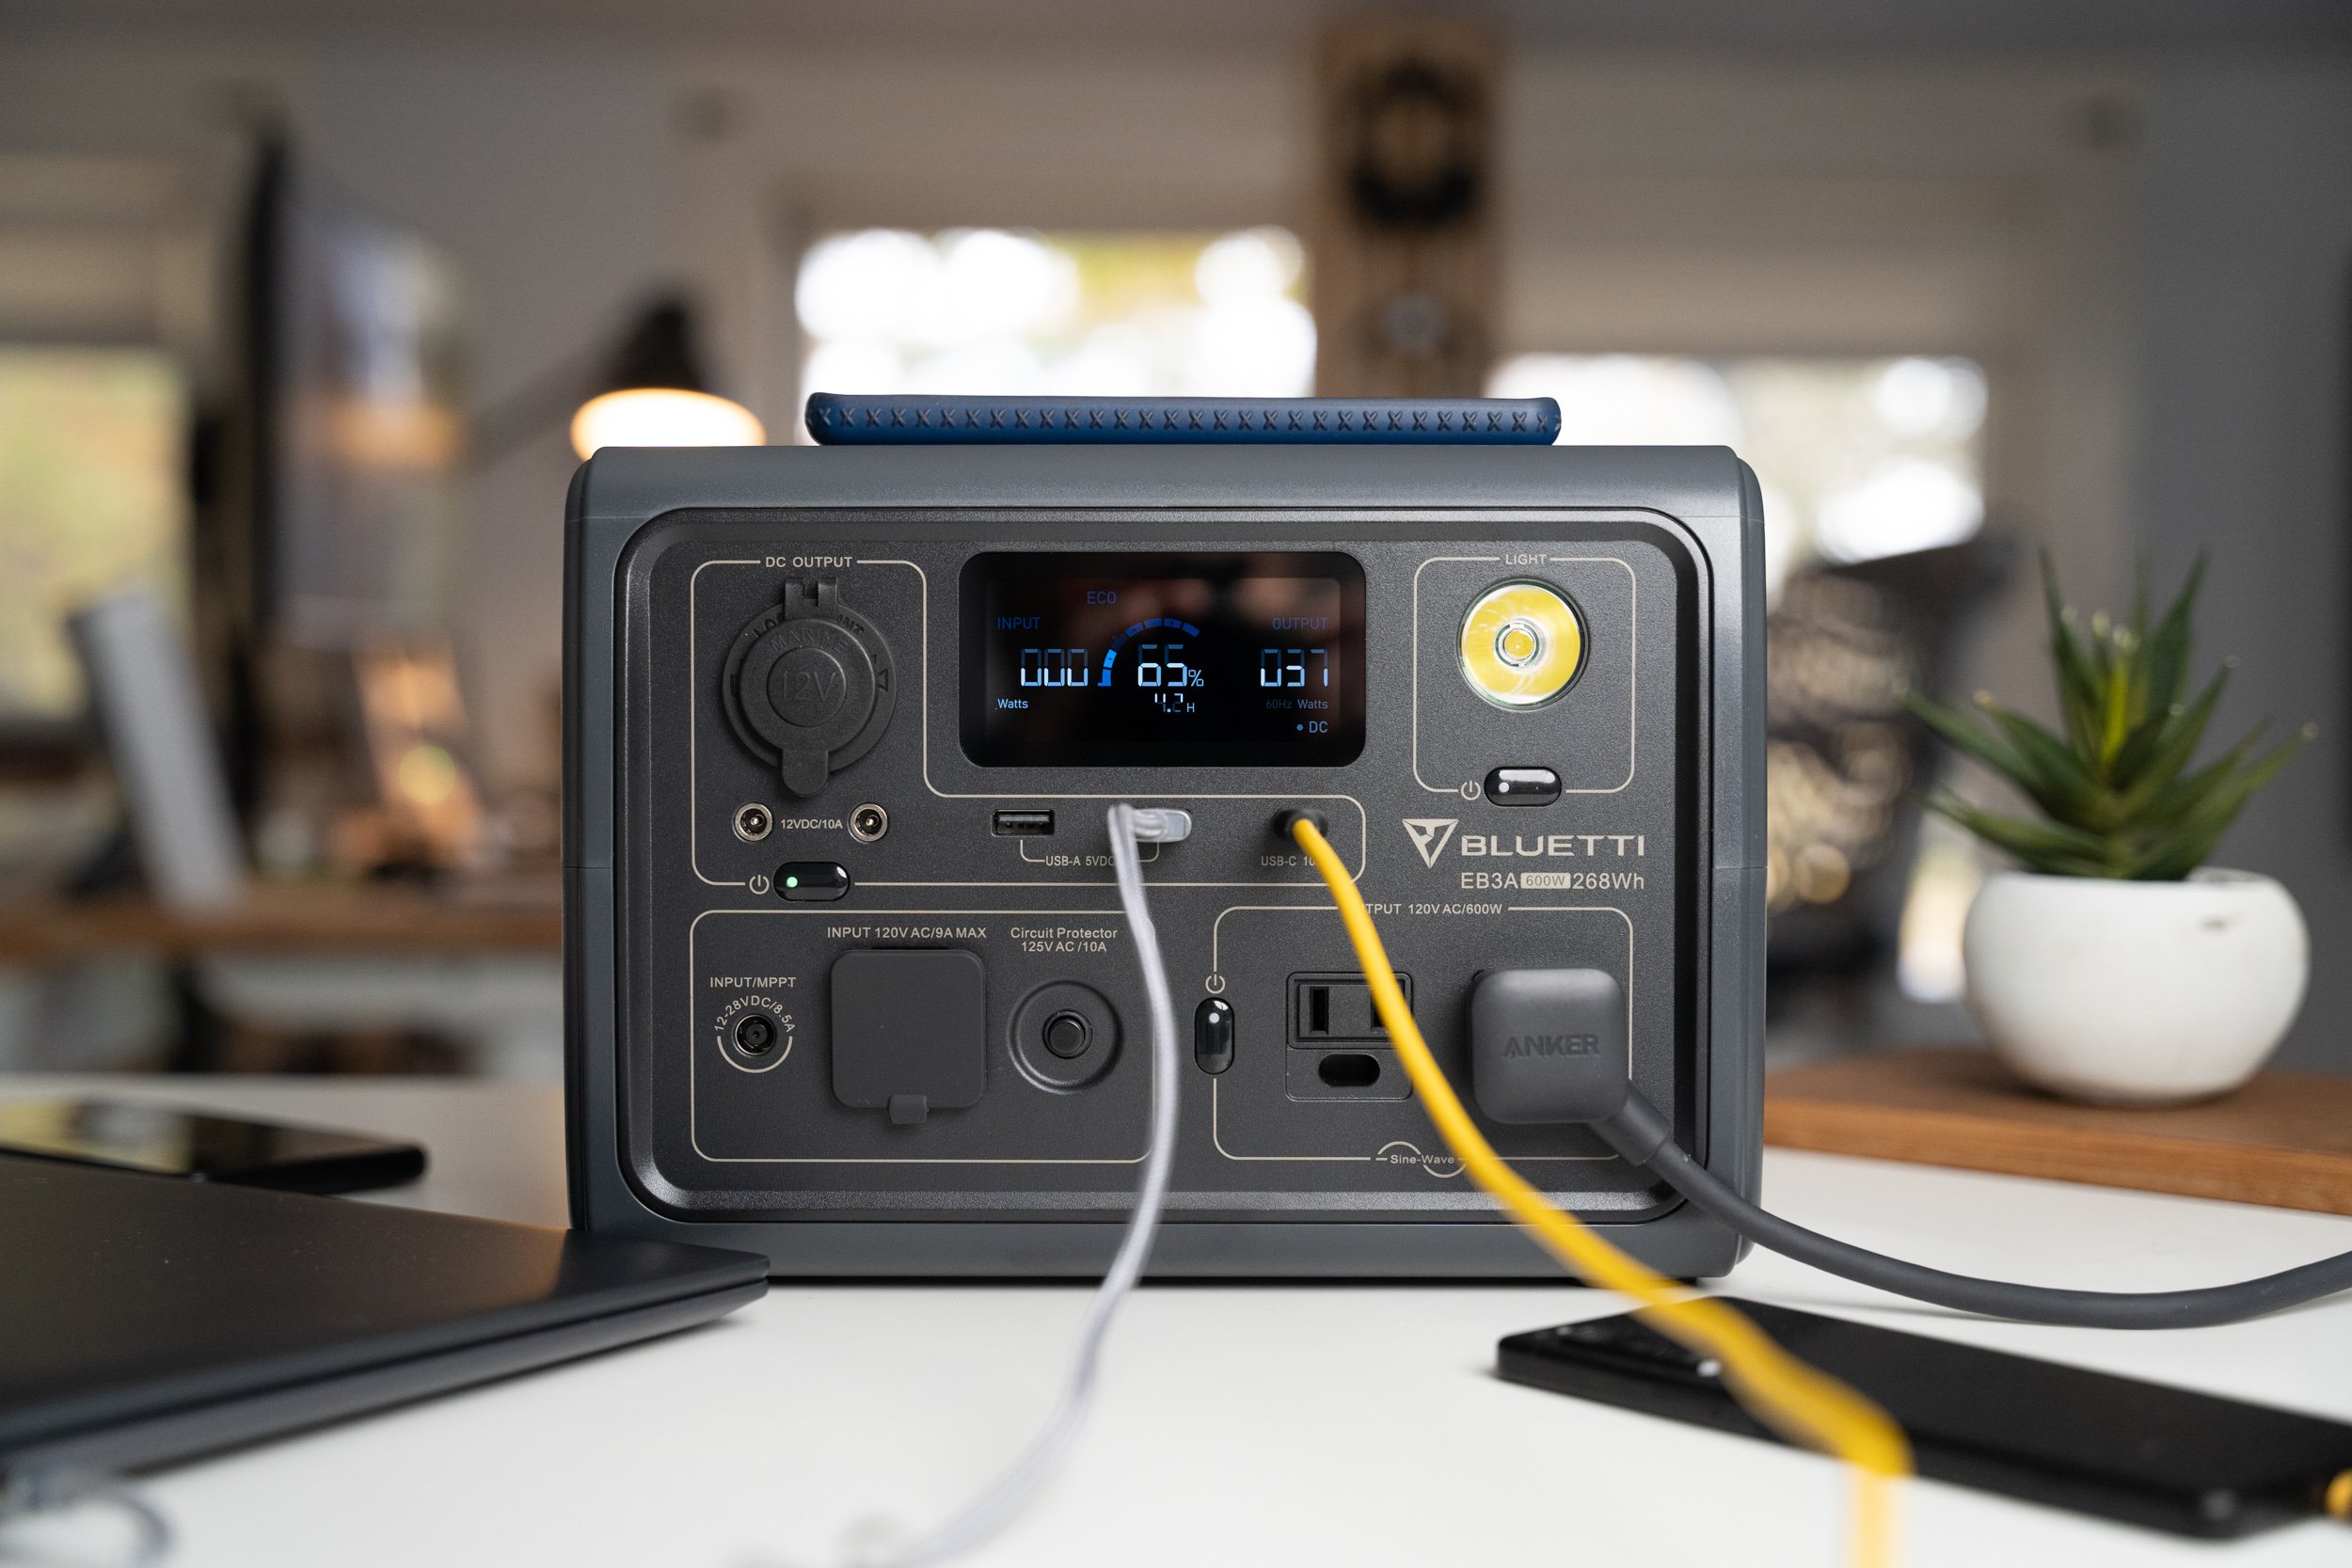 Bluetti's EB3A portable power station: the perfect size for your